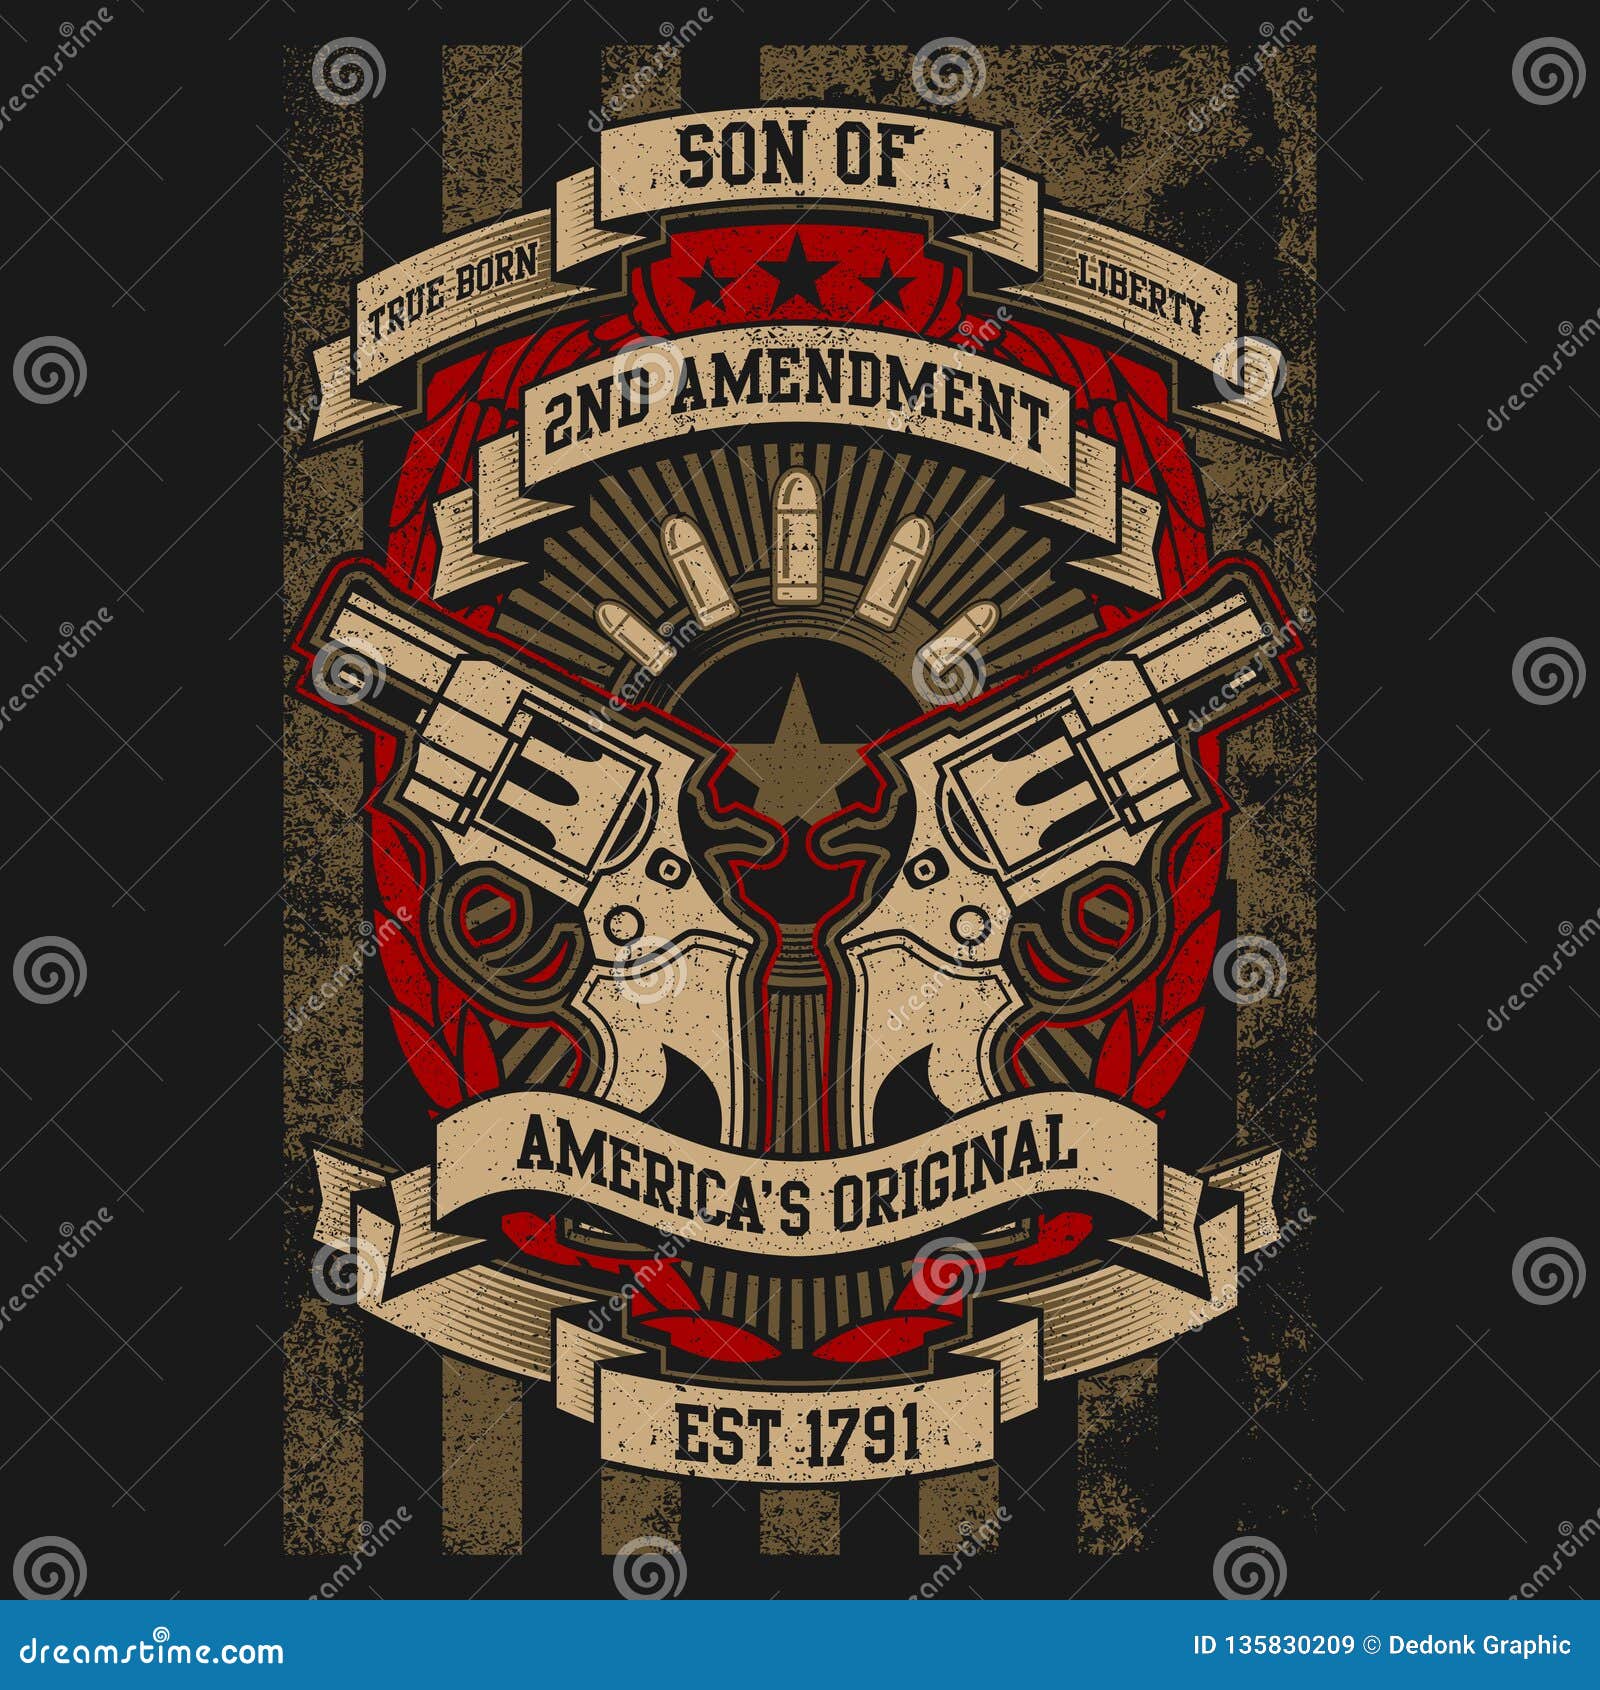 2nd Amendment the Right to Bear Arms 20 oz Tumbler Vinyl or Sublimation  Wrap  Pasadena 1 Hour Tees Banner  Signs